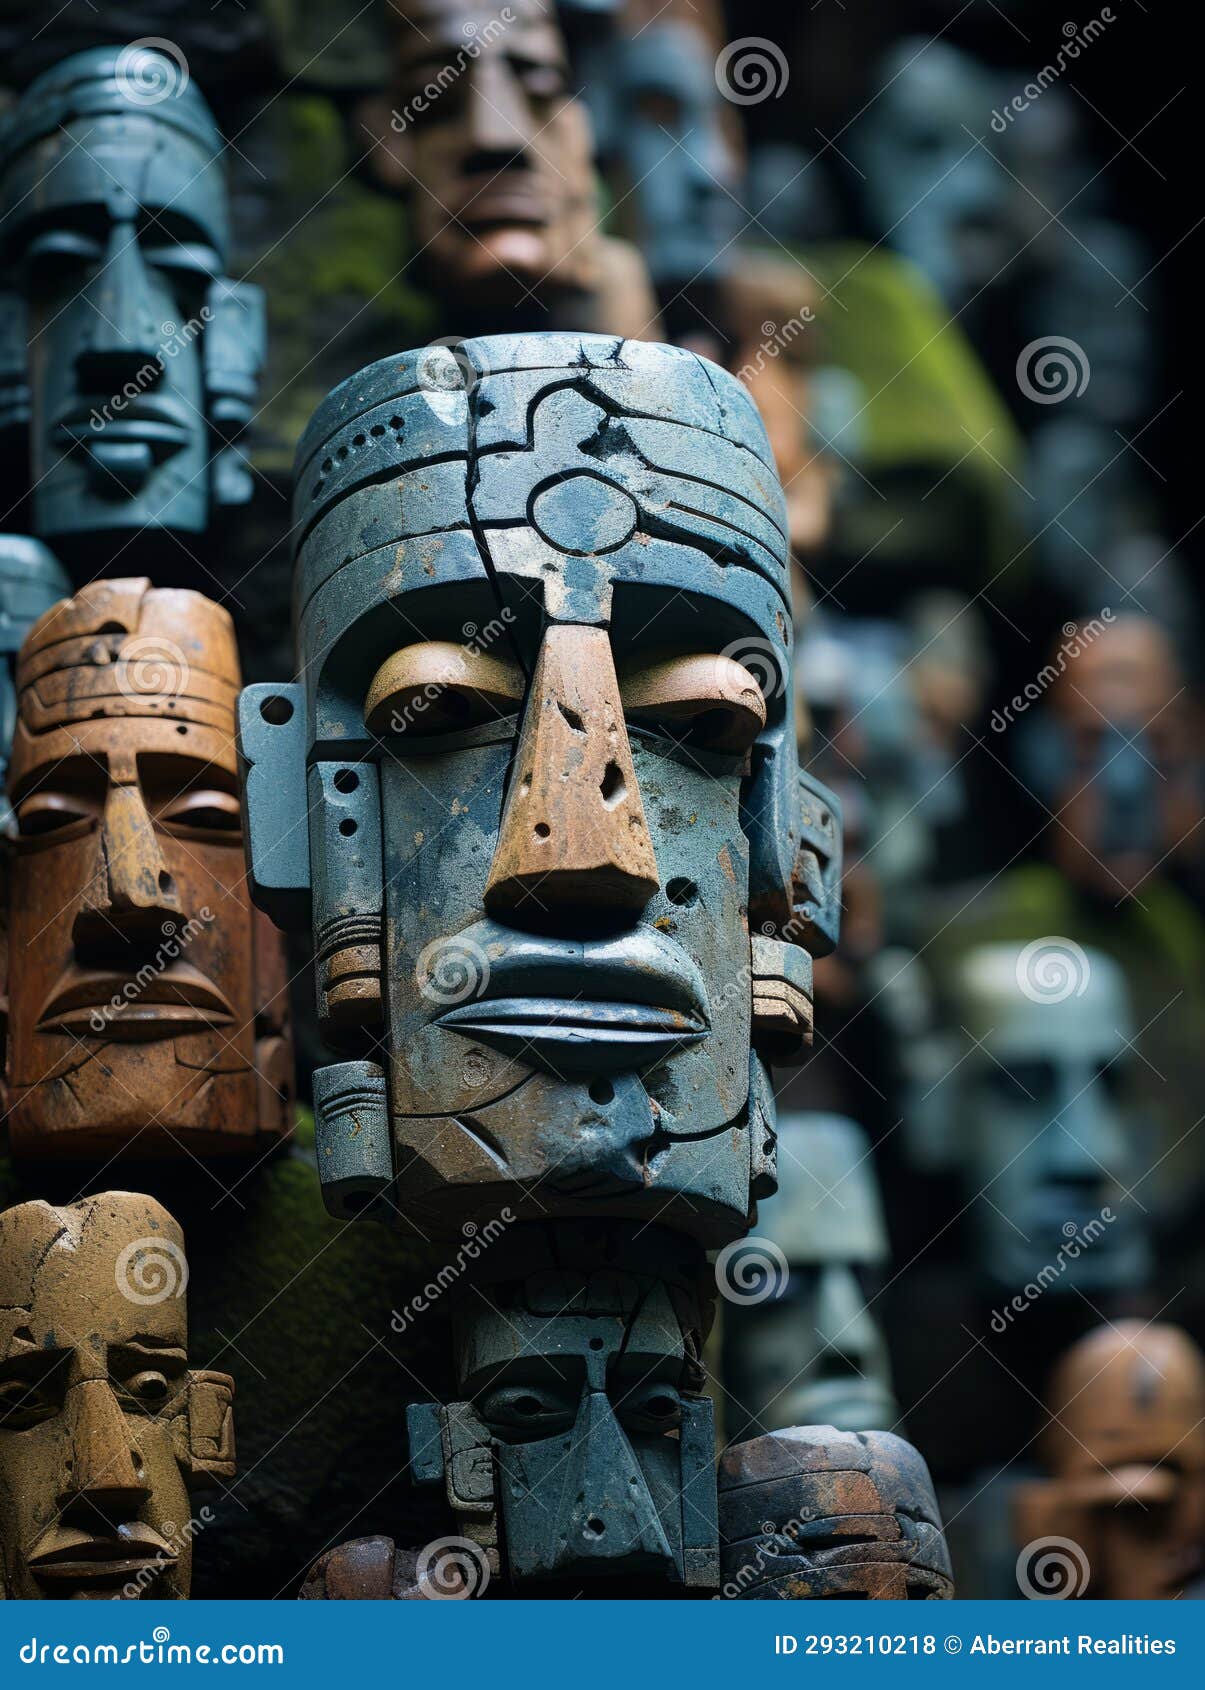 A Group of Wooden Masks with Faces on Them Stock Illustration ...